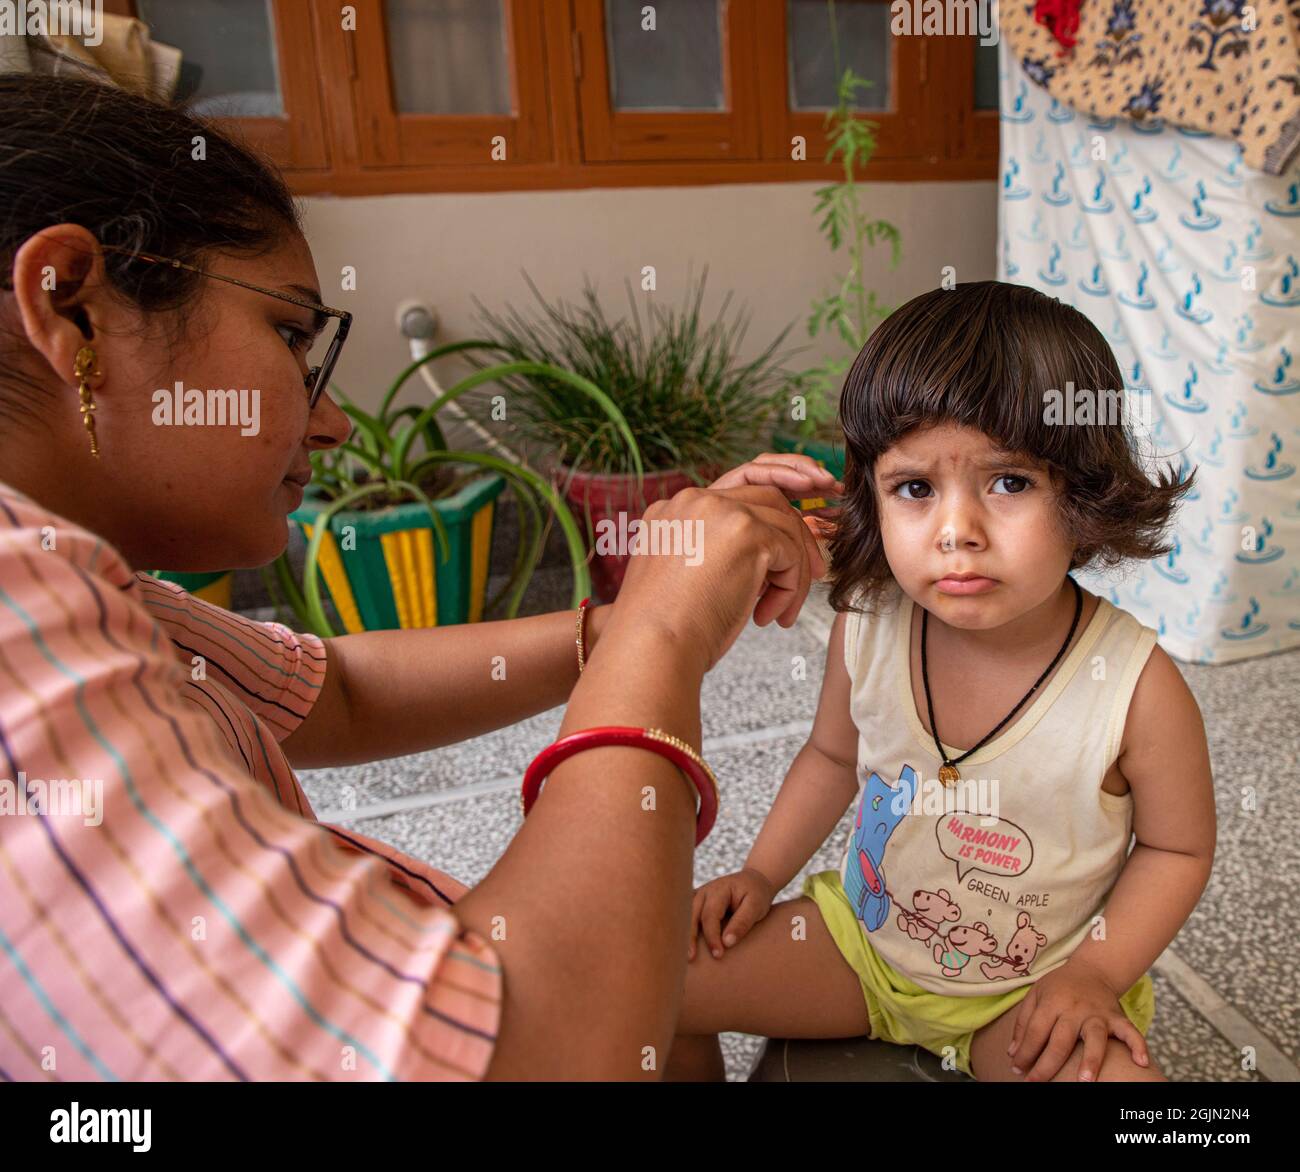 portrait of cute indian baby girl during haircut Stock Photo - Alamy